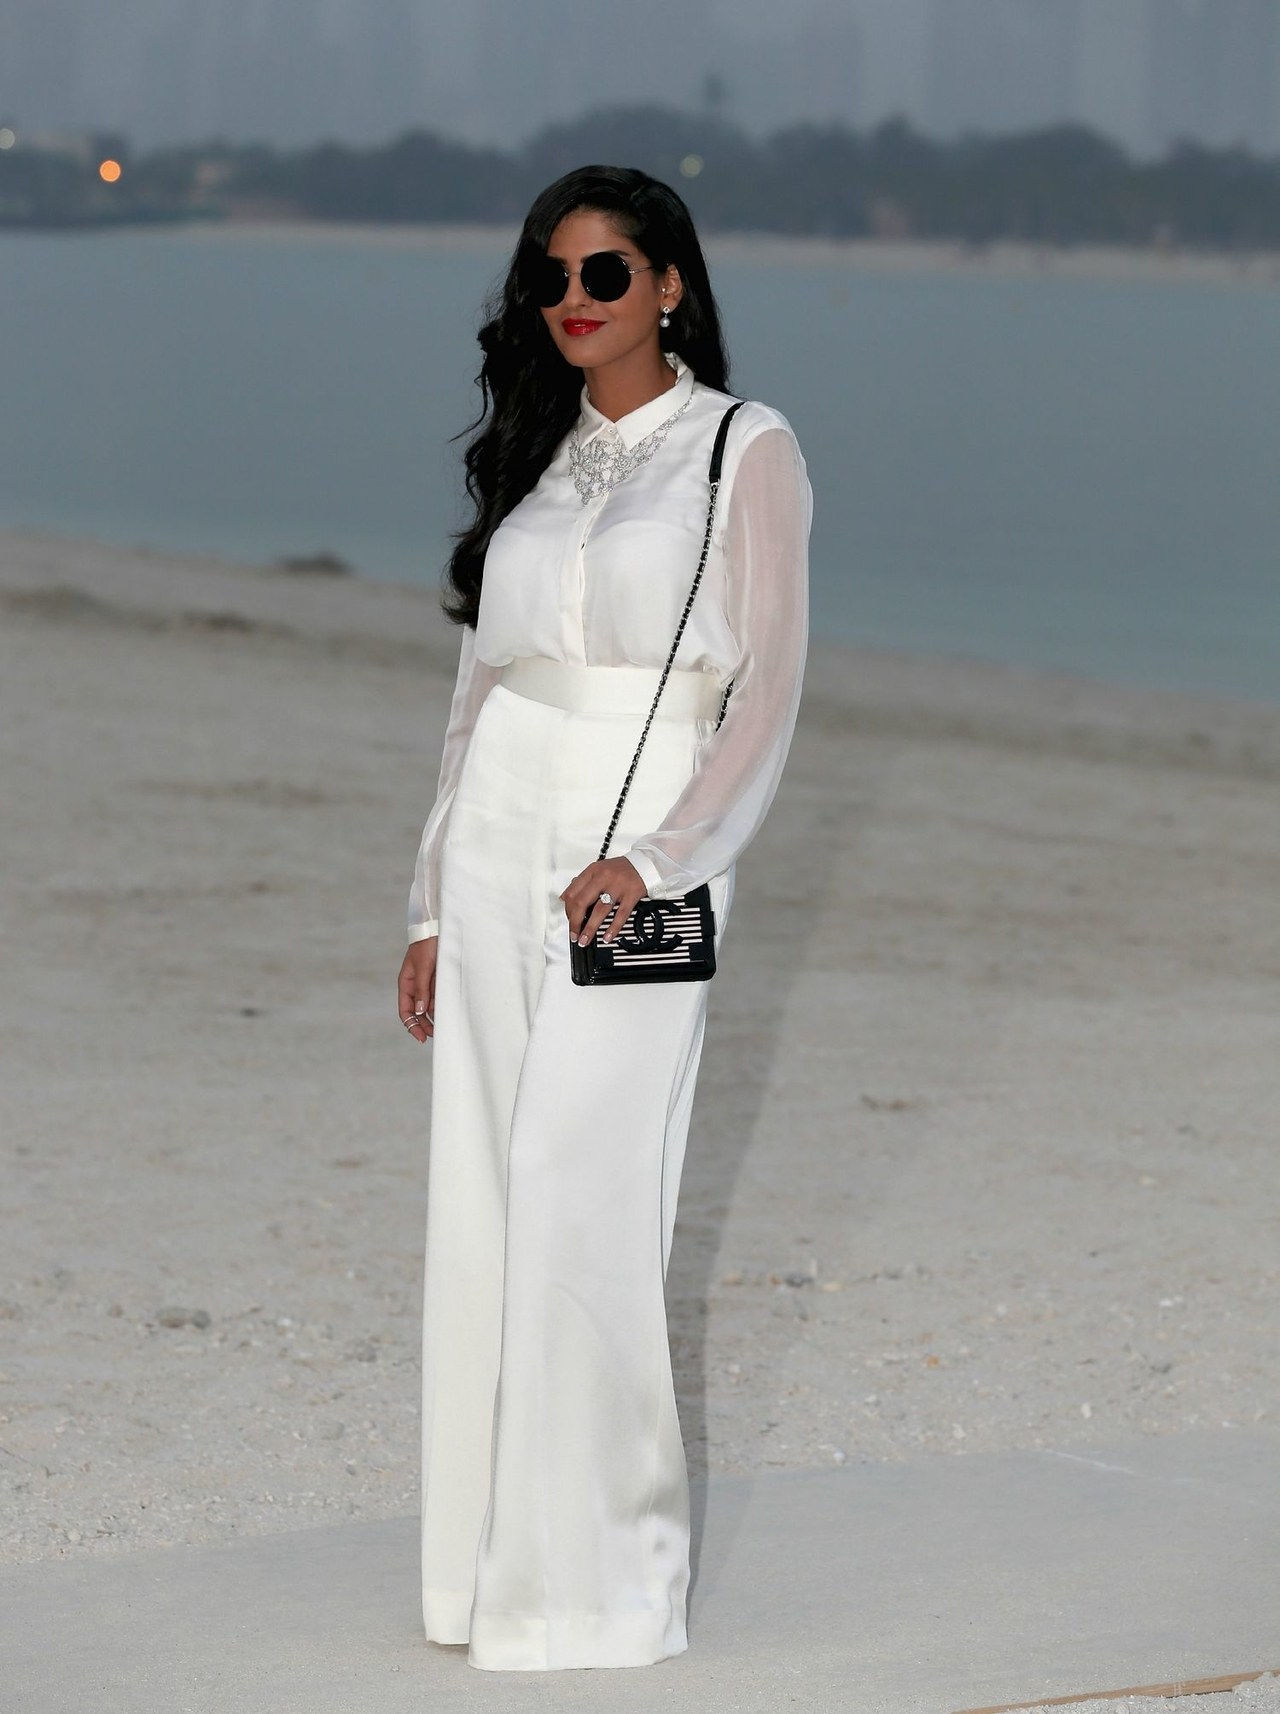 princesa ameerah chanel couture show white pants